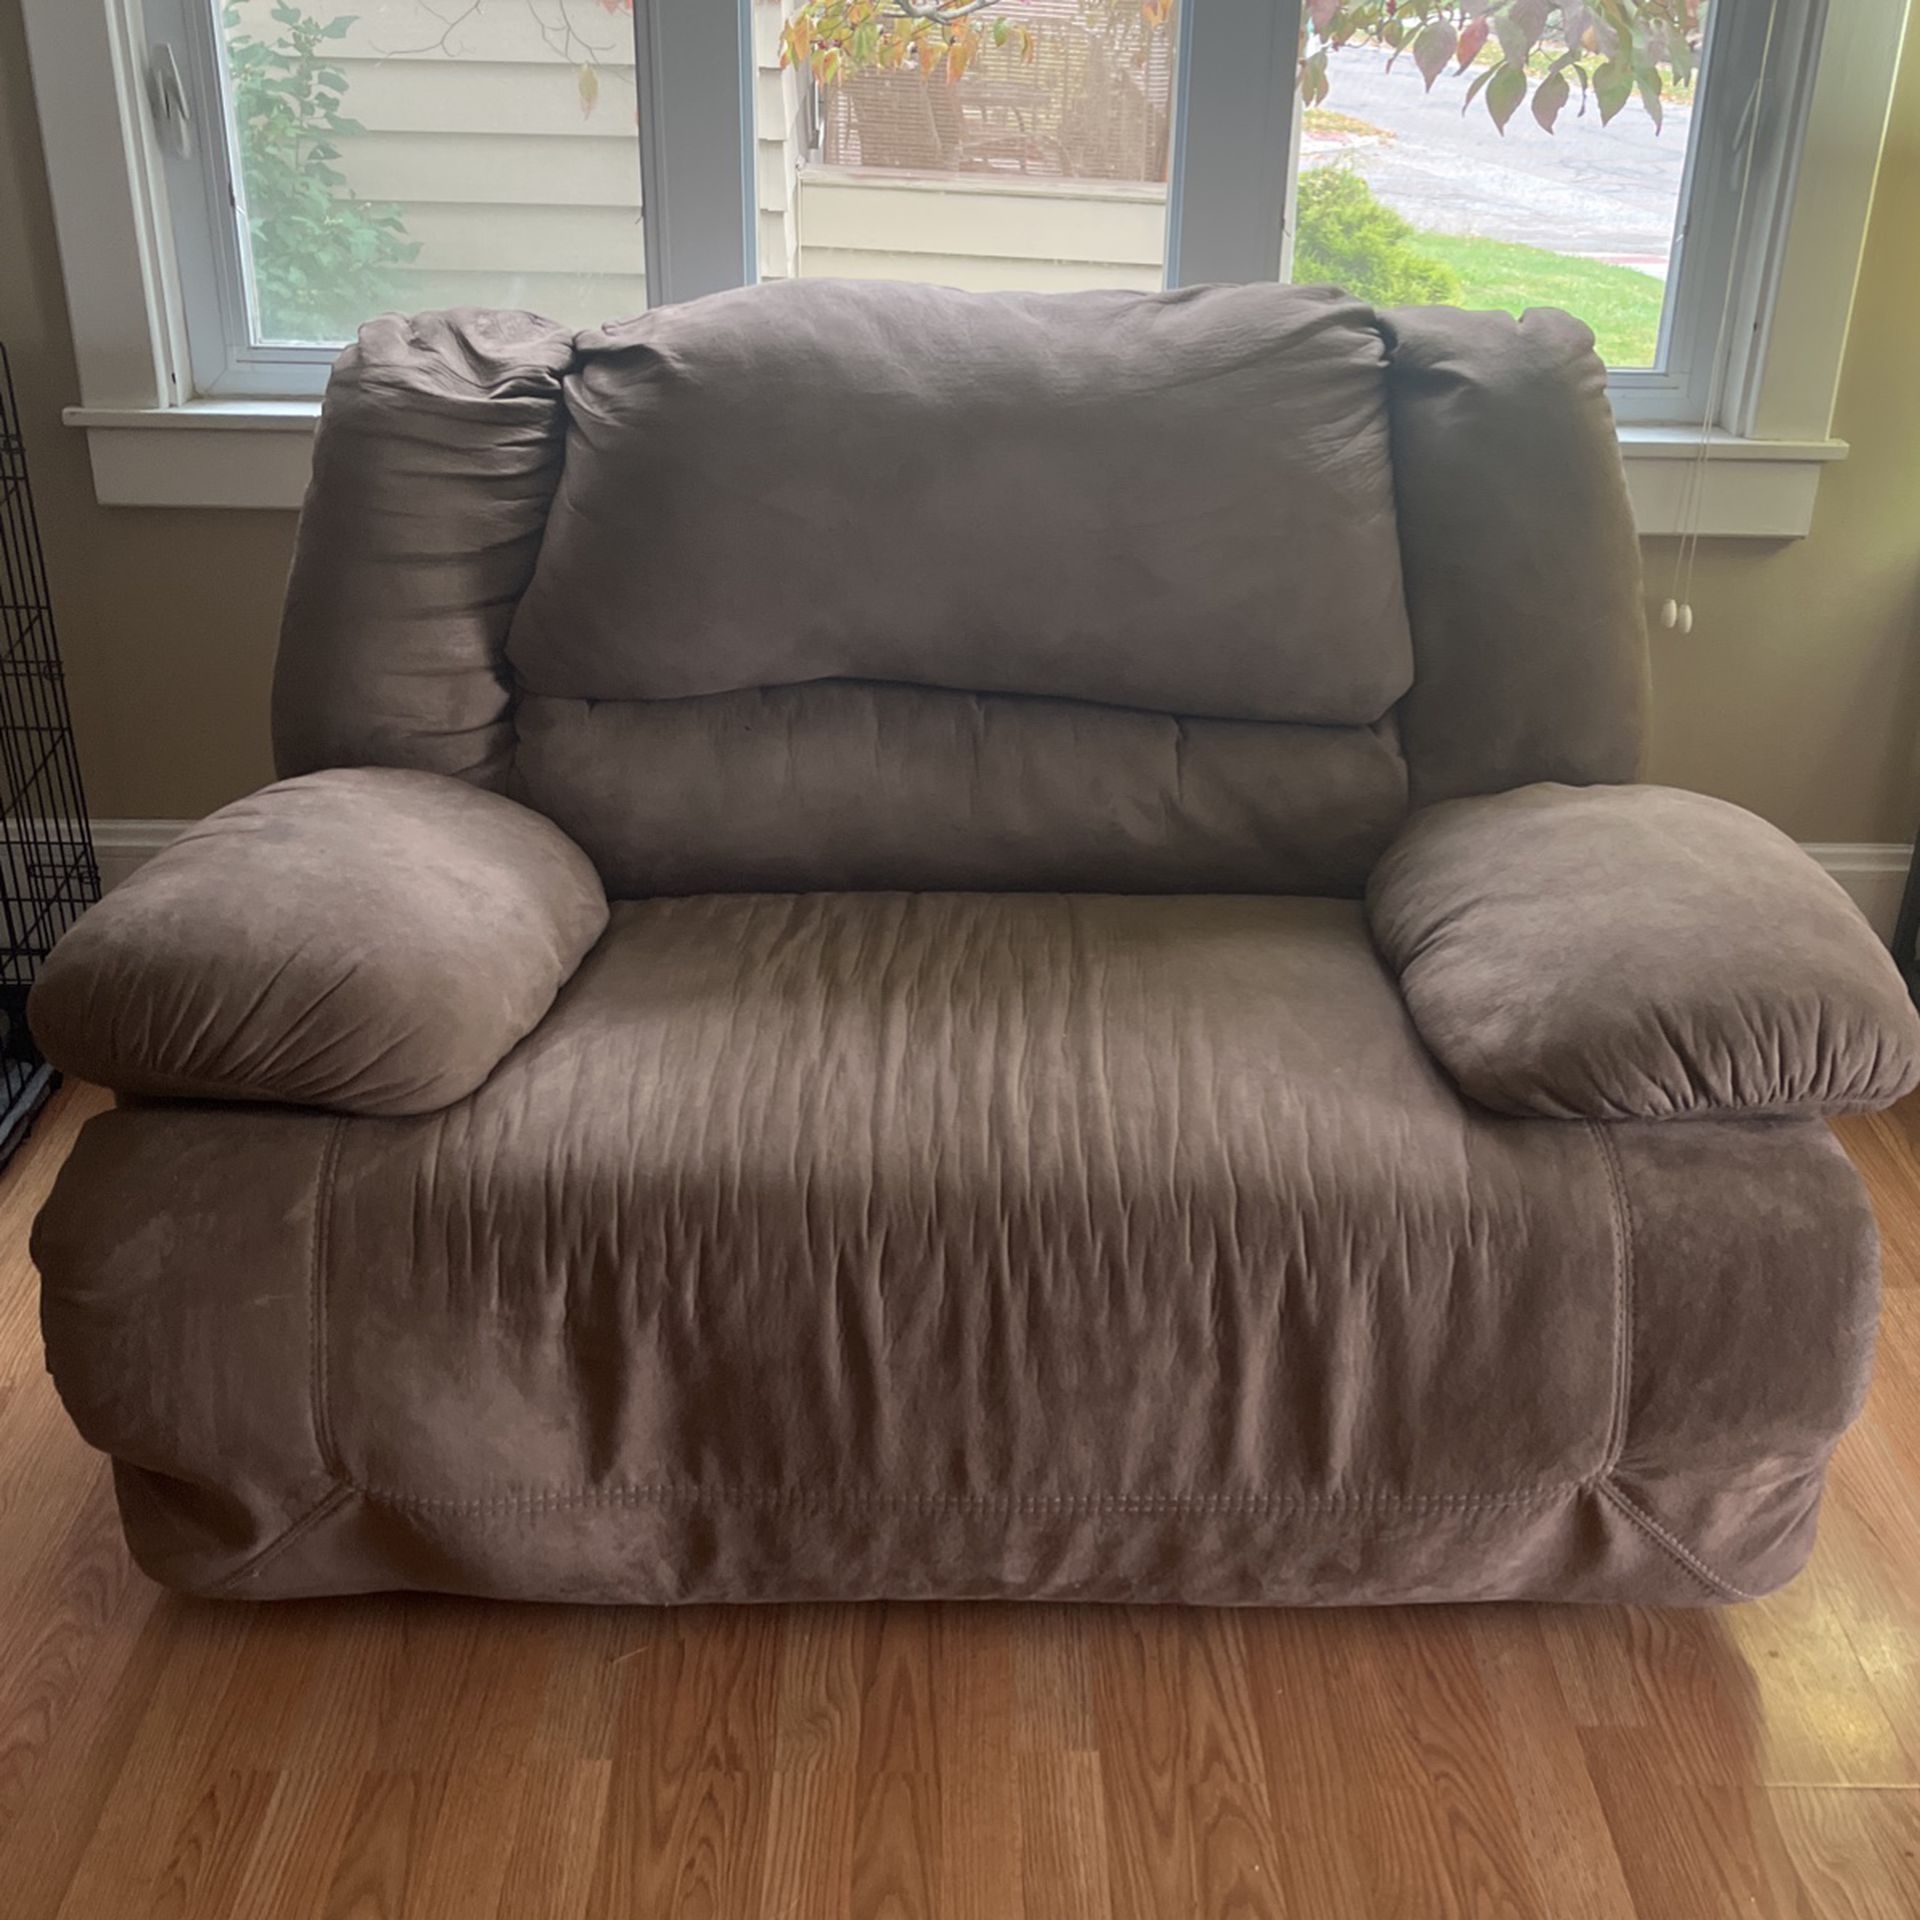 Oversized Reclining Chair